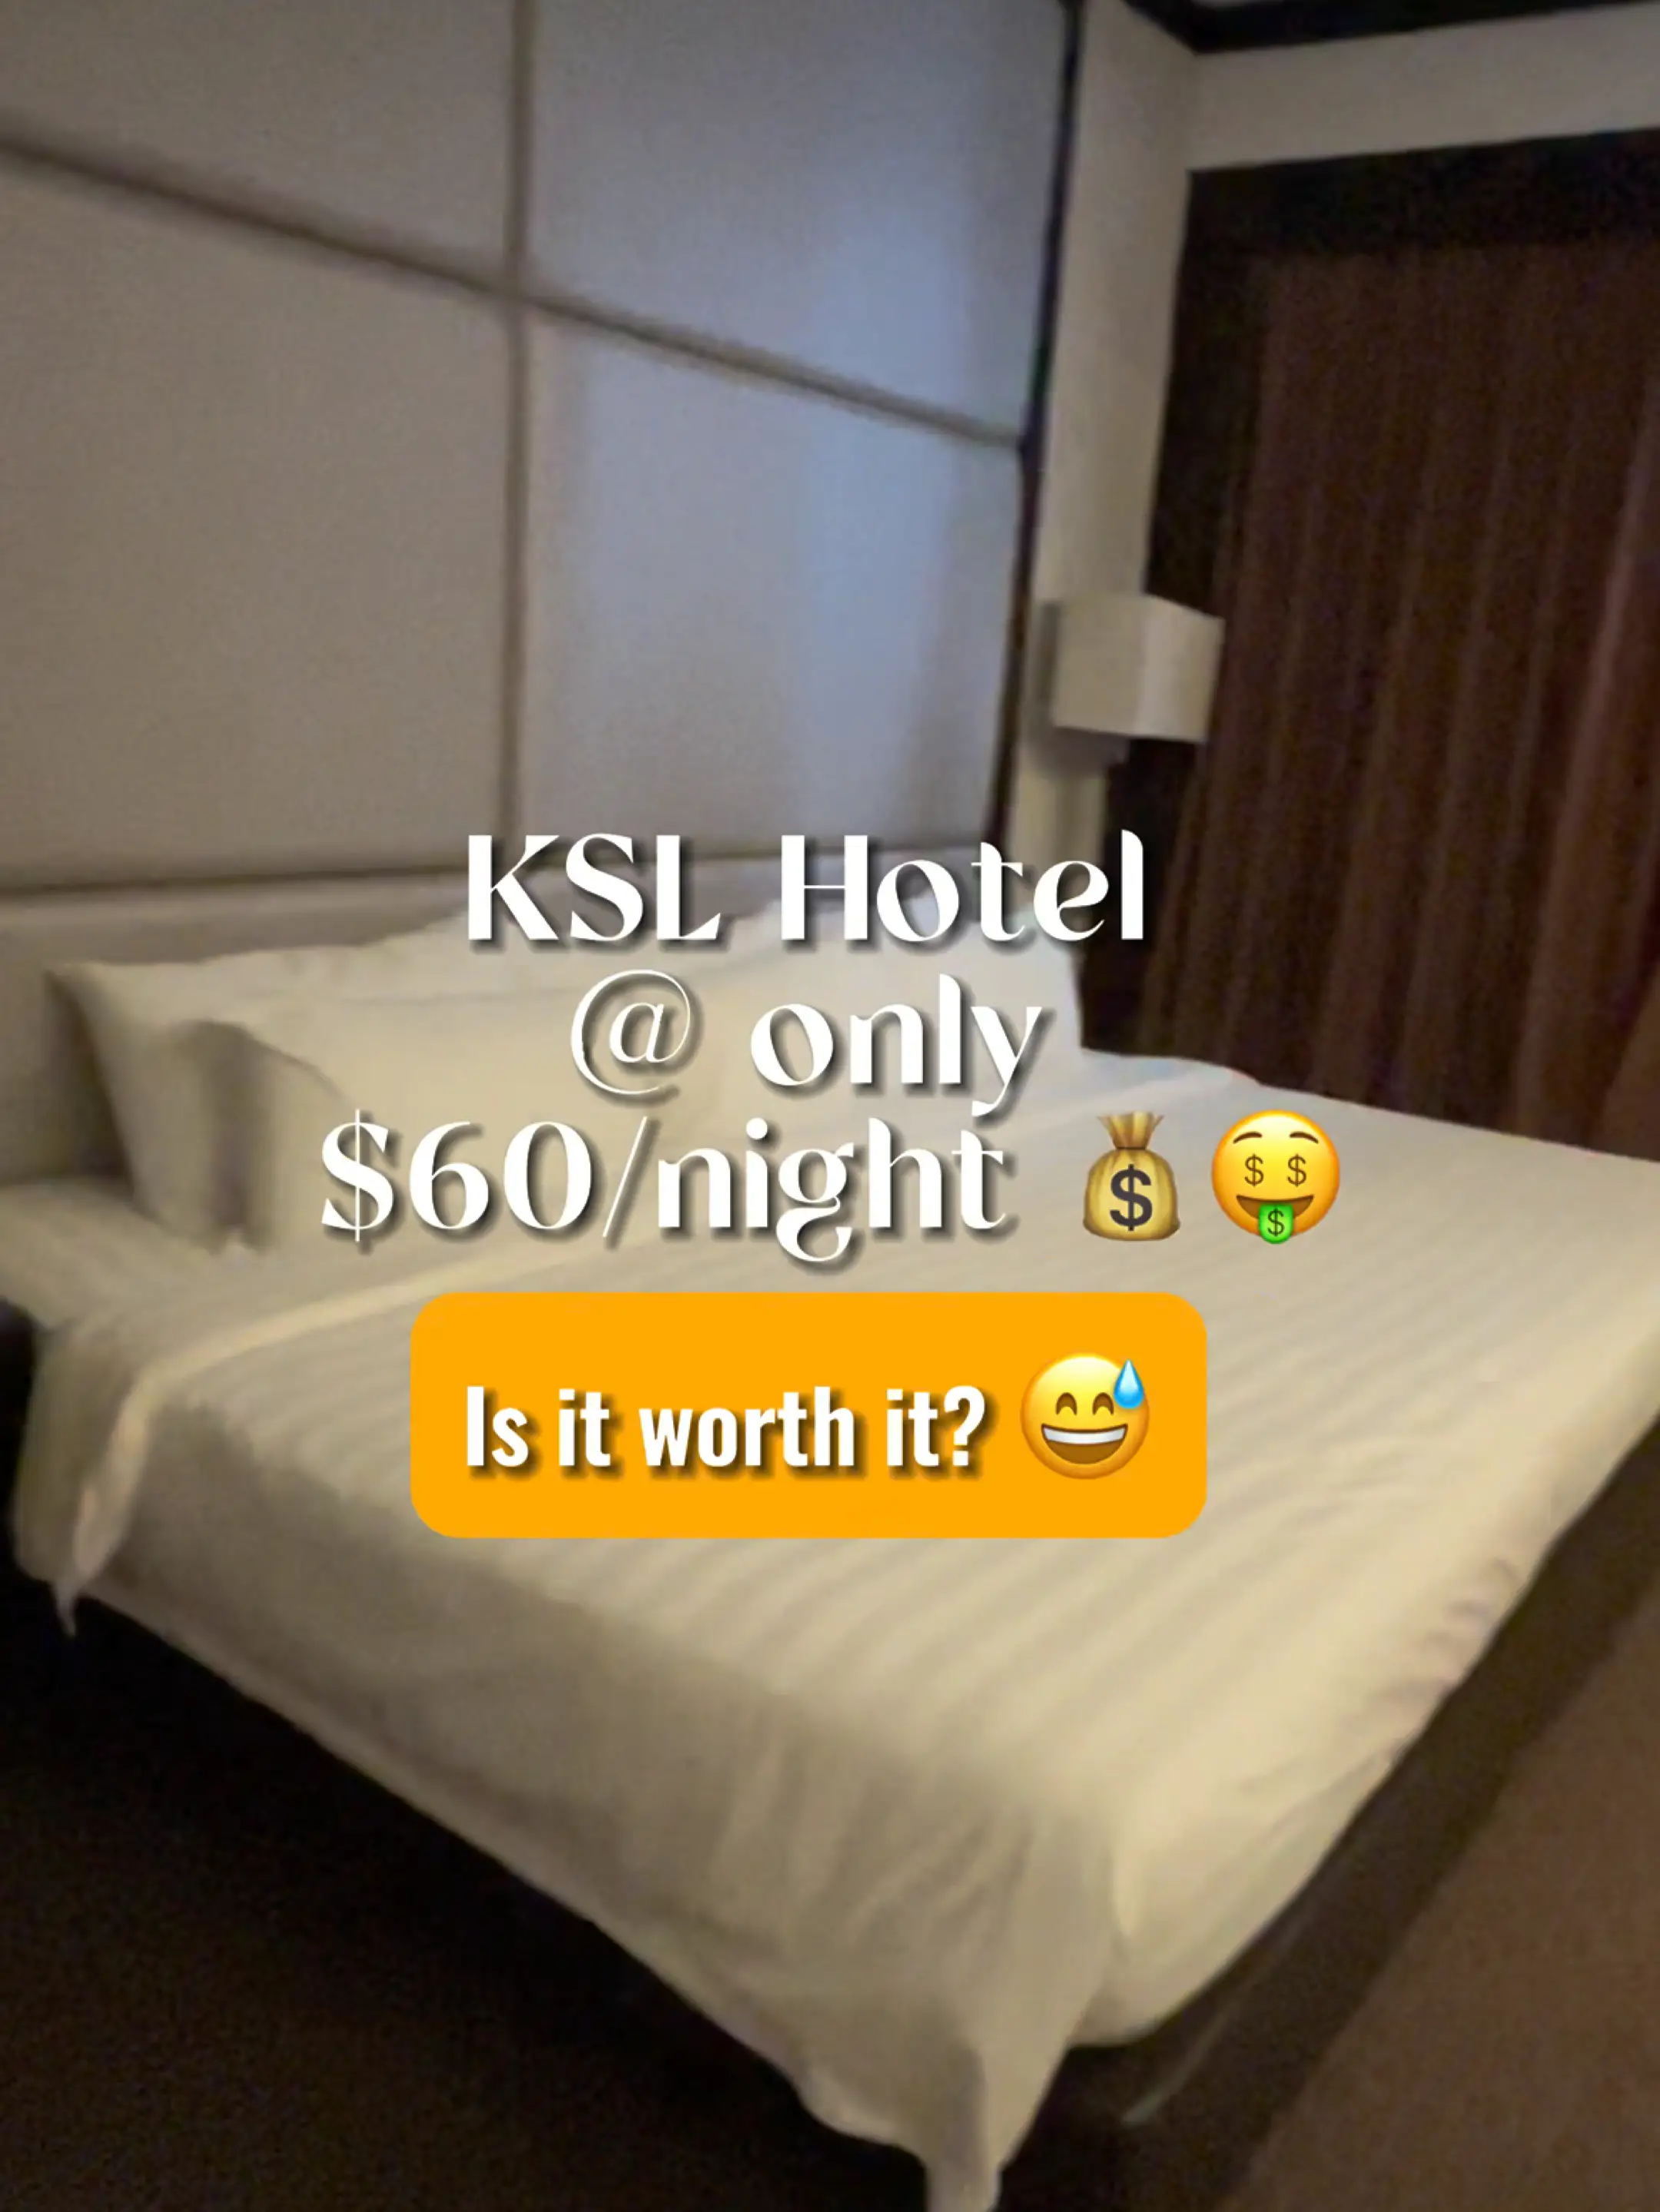 KSL Hotel at only $60+ PER NIGHT💰 Is it worth it?👀's images